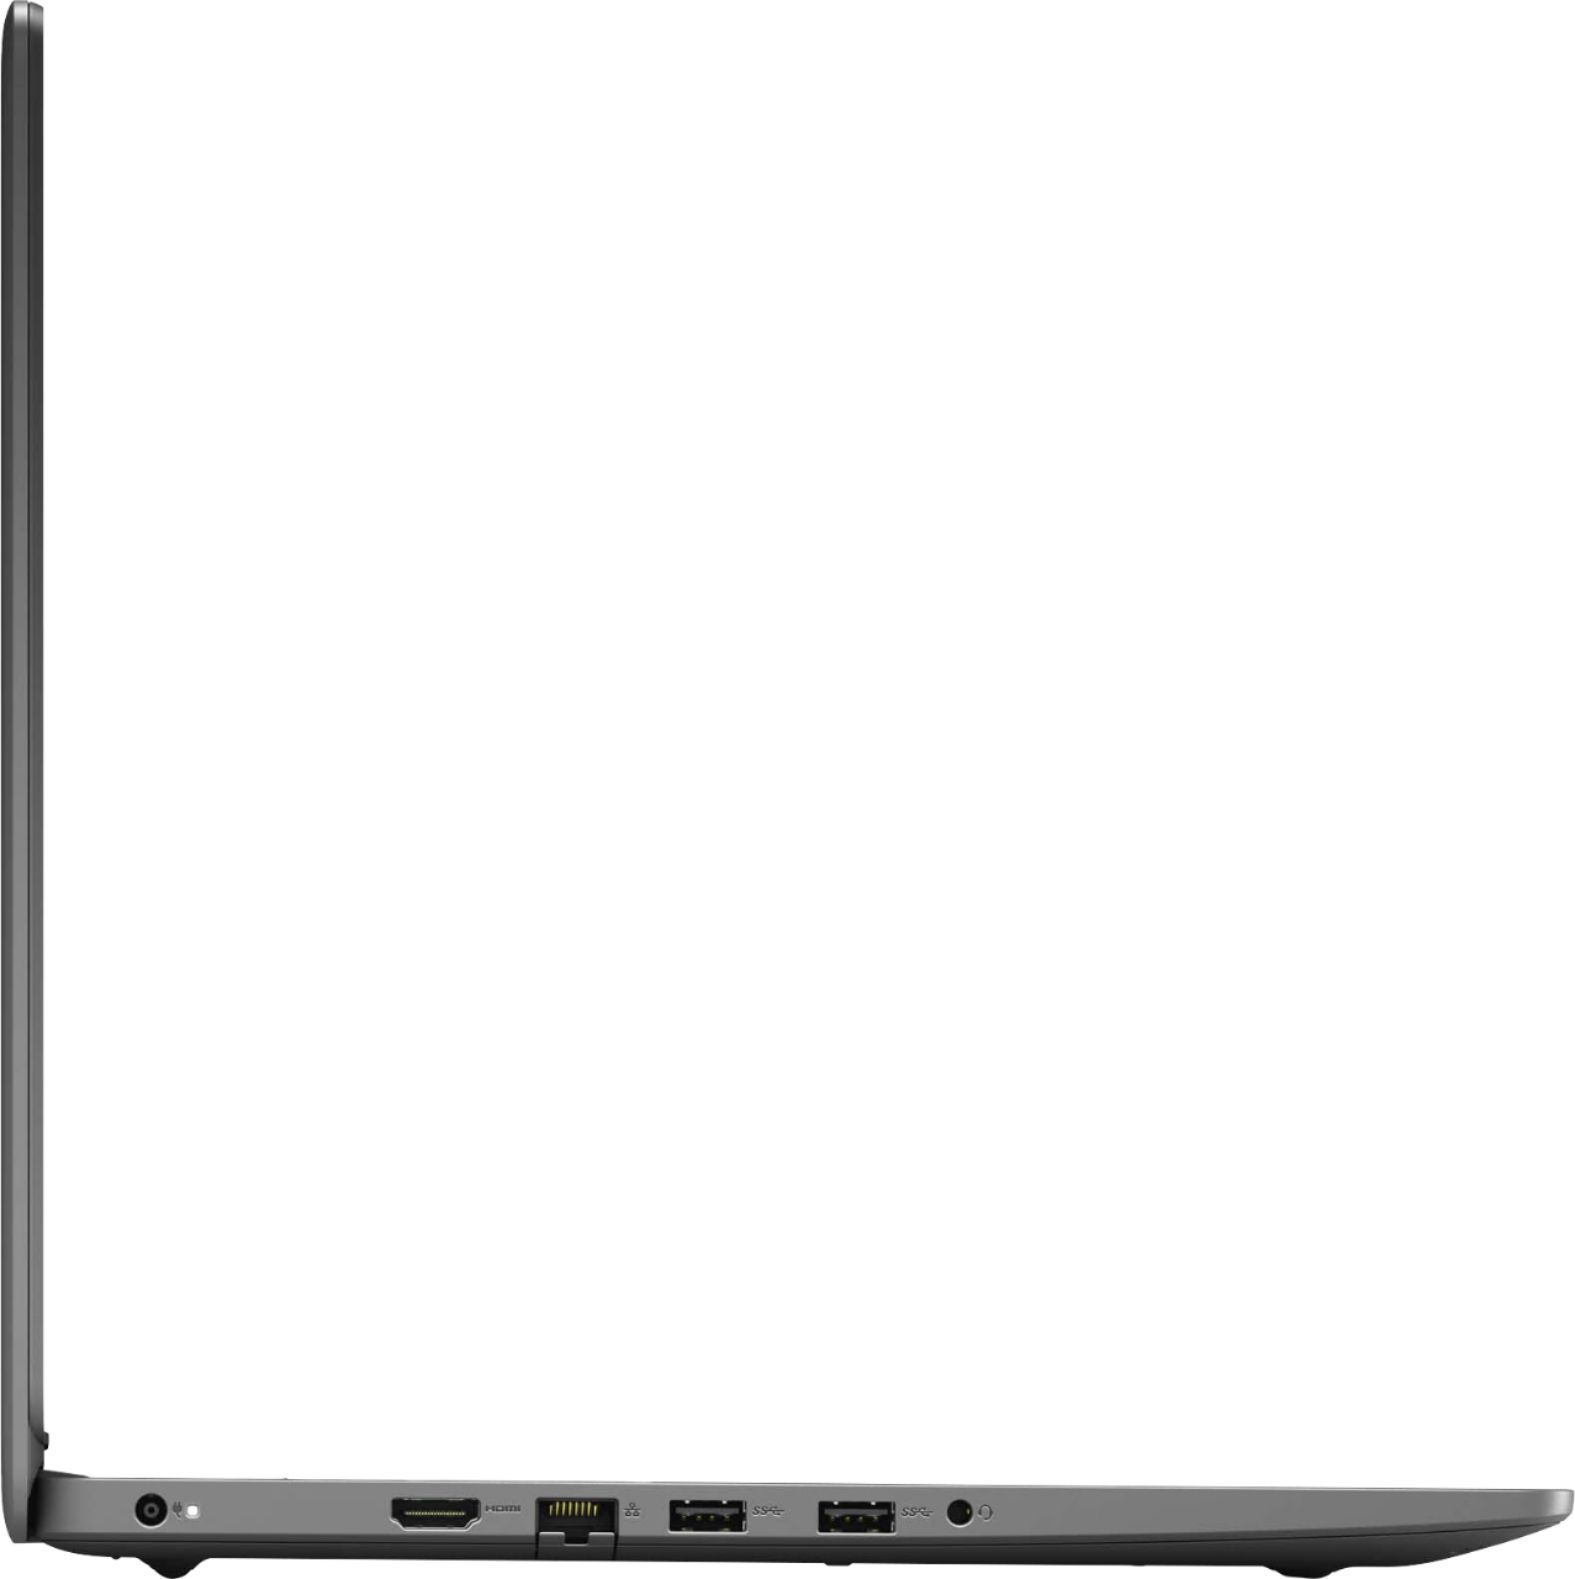 Angle View: Dell - Inspiron 15.6" FHD Touch-Screen Laptop - AMD Ryzen 5 - 8GB Memory - 256GB Solid State Drive - Black